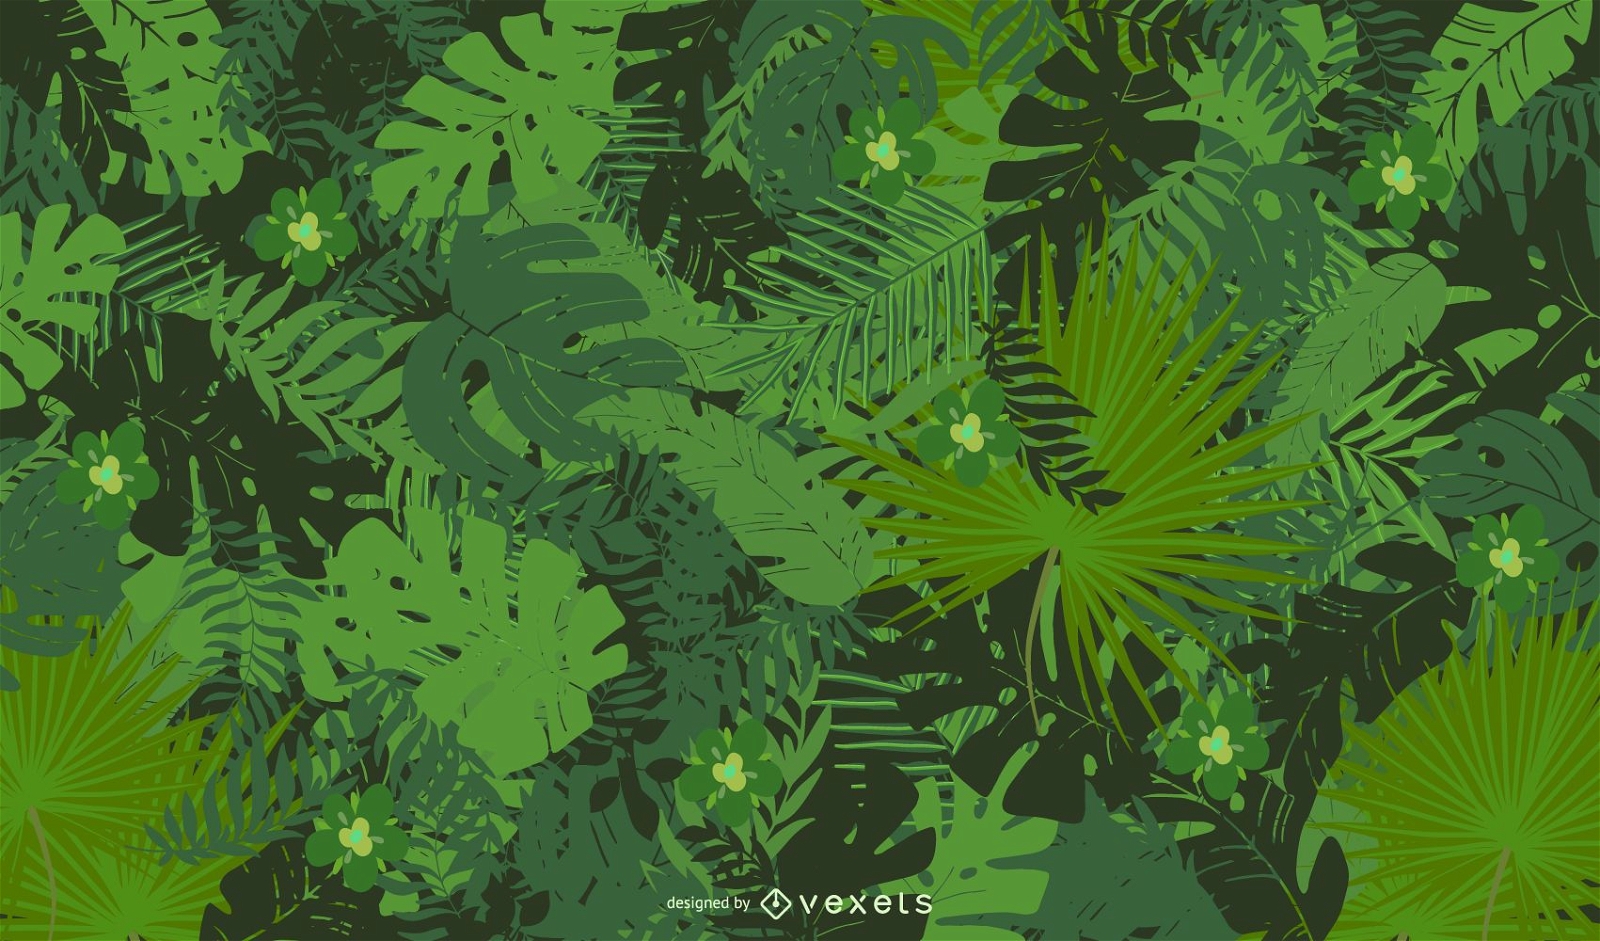 Abstract Floral Green Background Vector Illustration